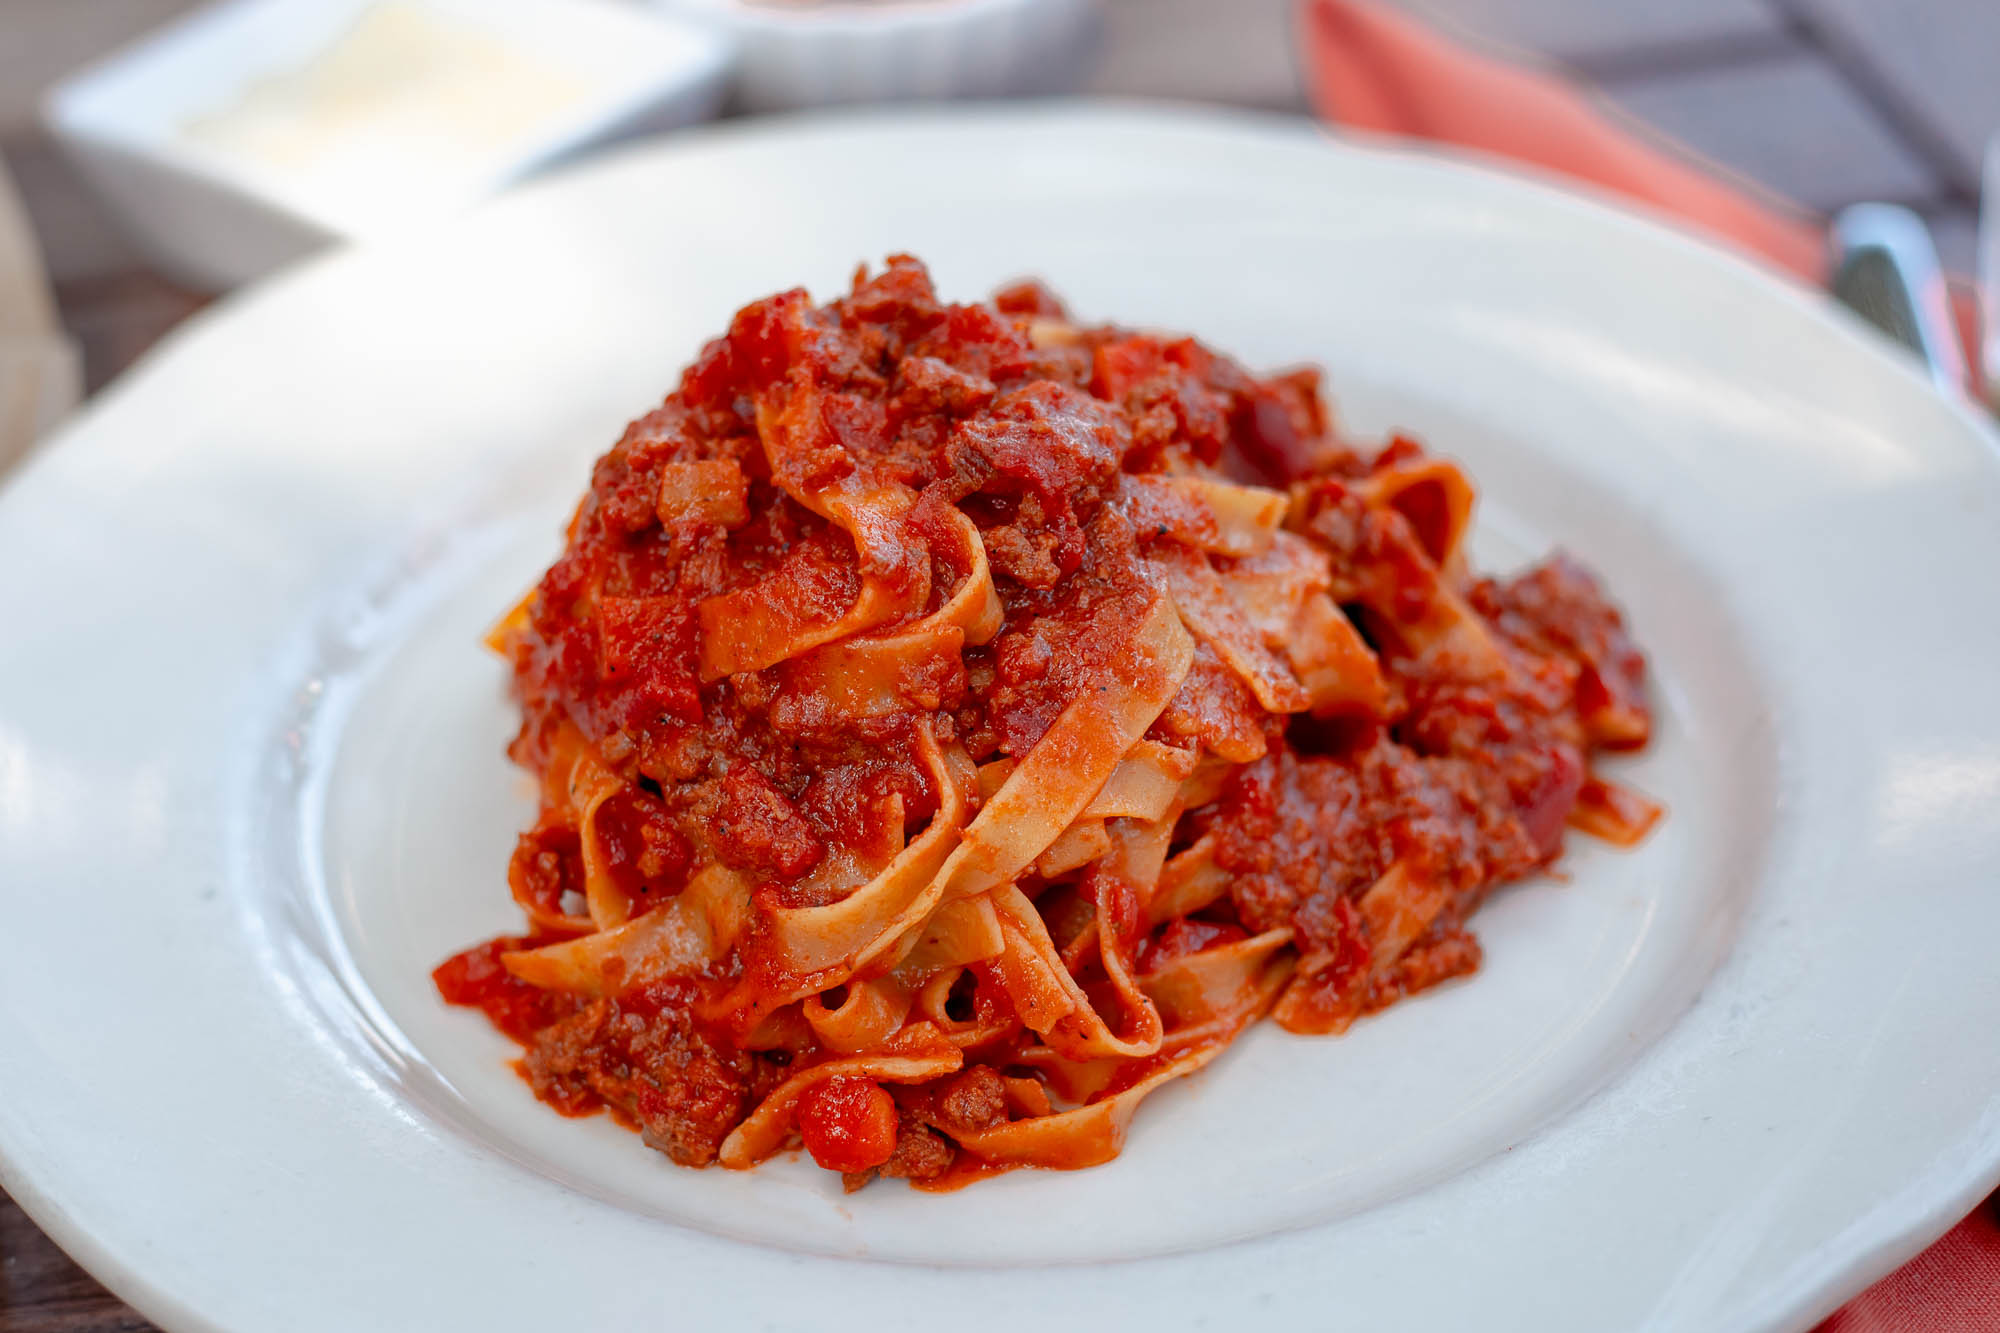 pasta with bolognese sauce